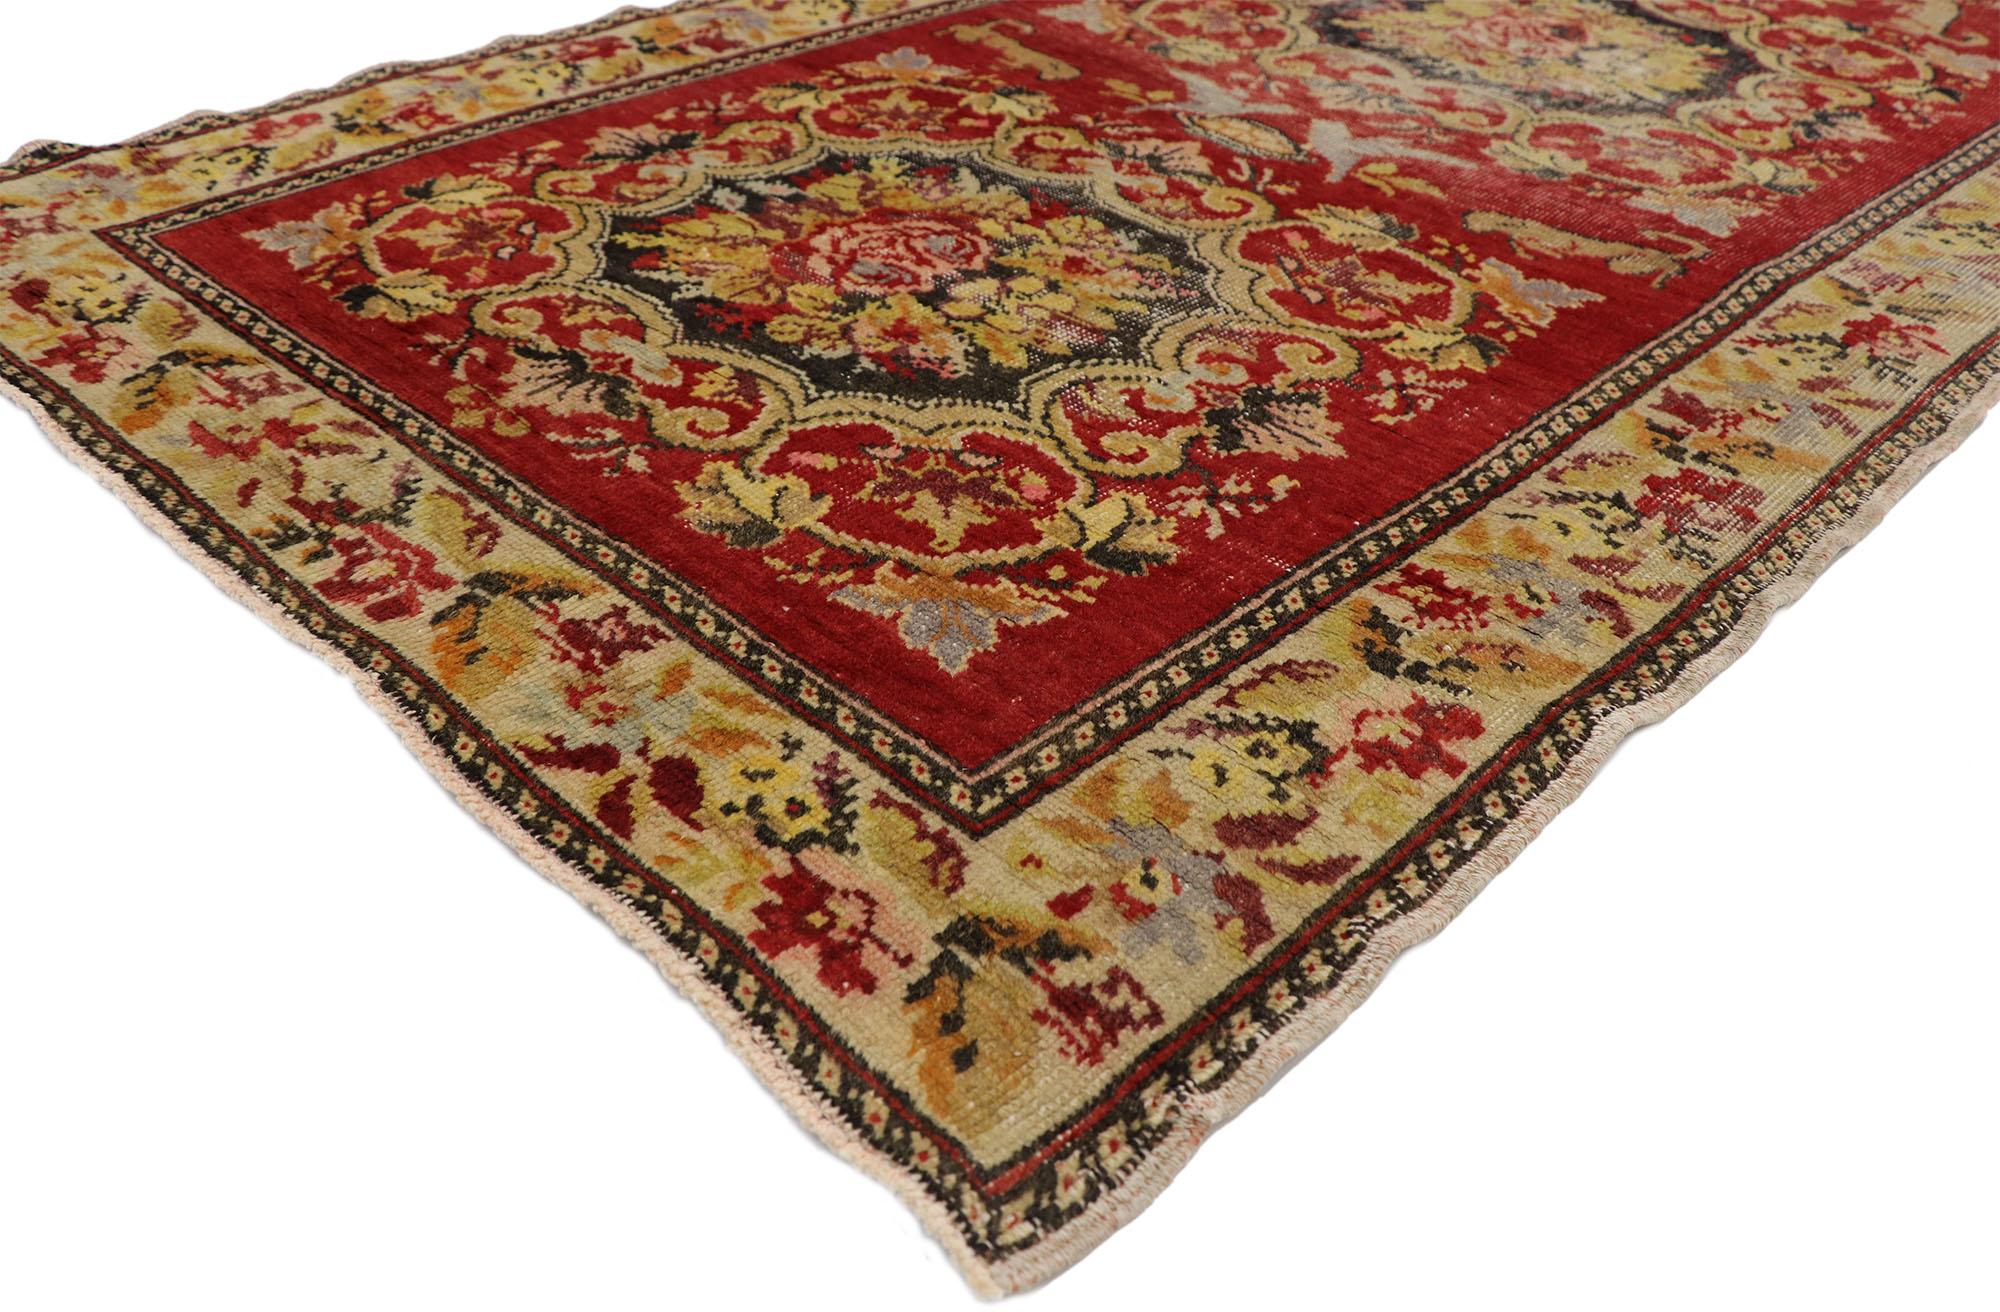 52067 Distressed Vintage Turkish Oushak Hallway Runner with Rustic Baroque Style. This hand knotted wool distressed vintage Turkish Oushak hallway runner features four rose bouquet medallions with acanthus scrolls. Each medallion is surround with an